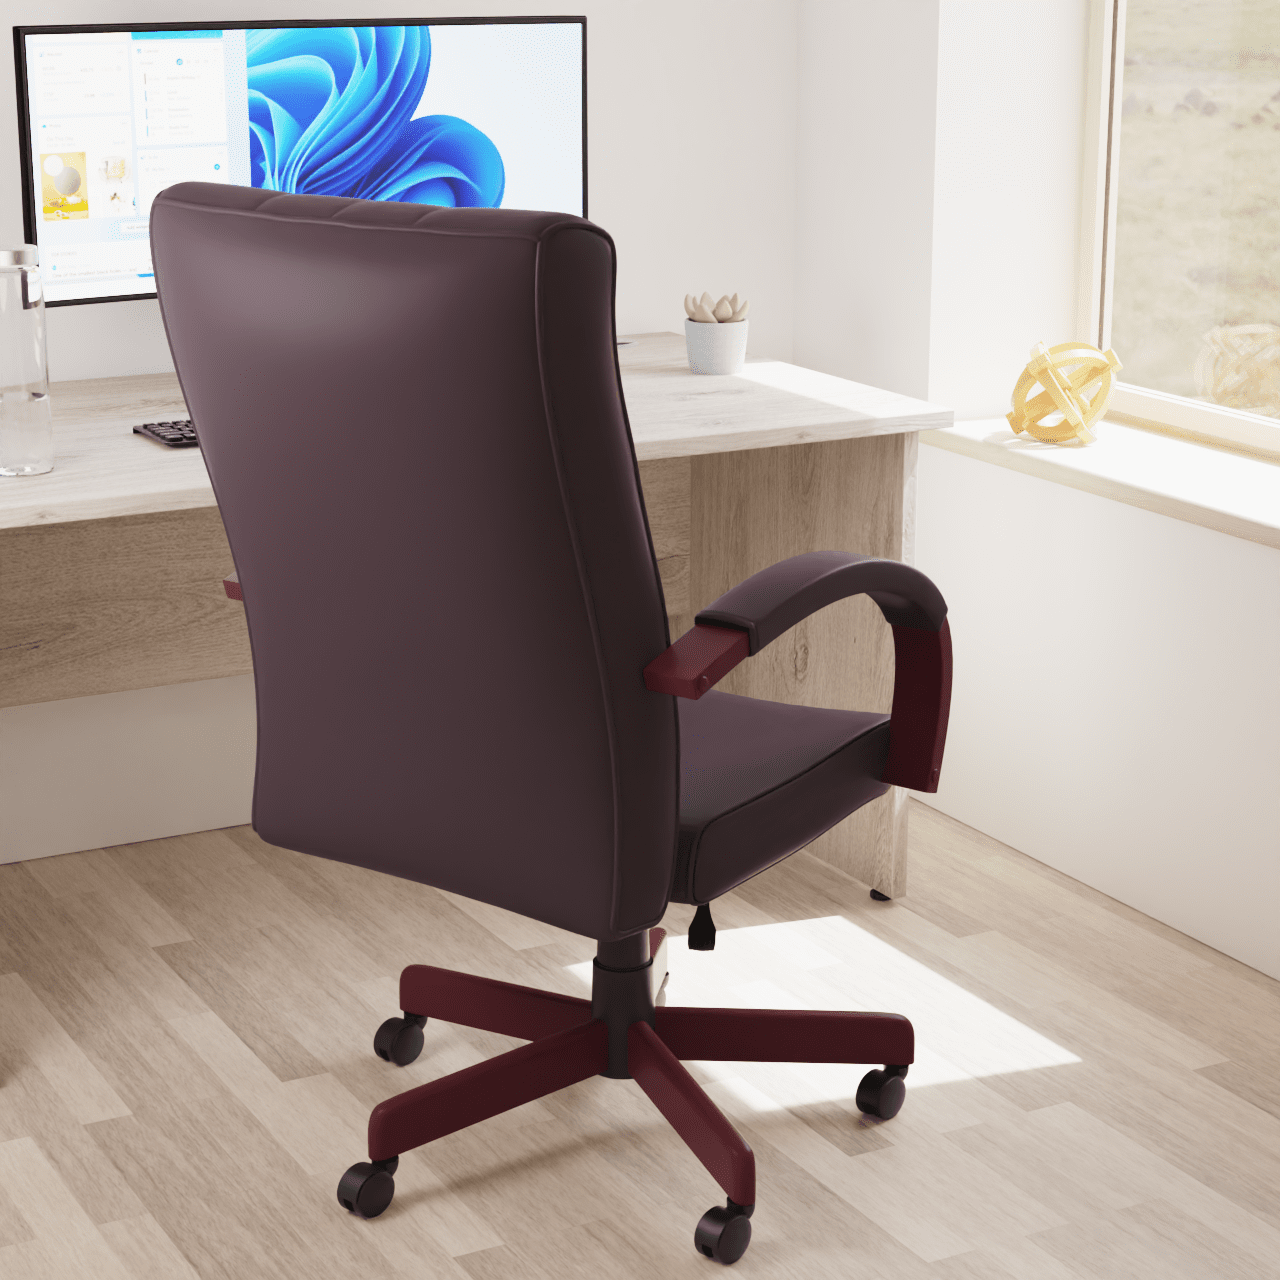 Chesterfield High Back Executive Office Chair - Soft Bonded Leather, Wooden Frame, 110kg Capacity, 8hr Usage, Gas Height Adjustment